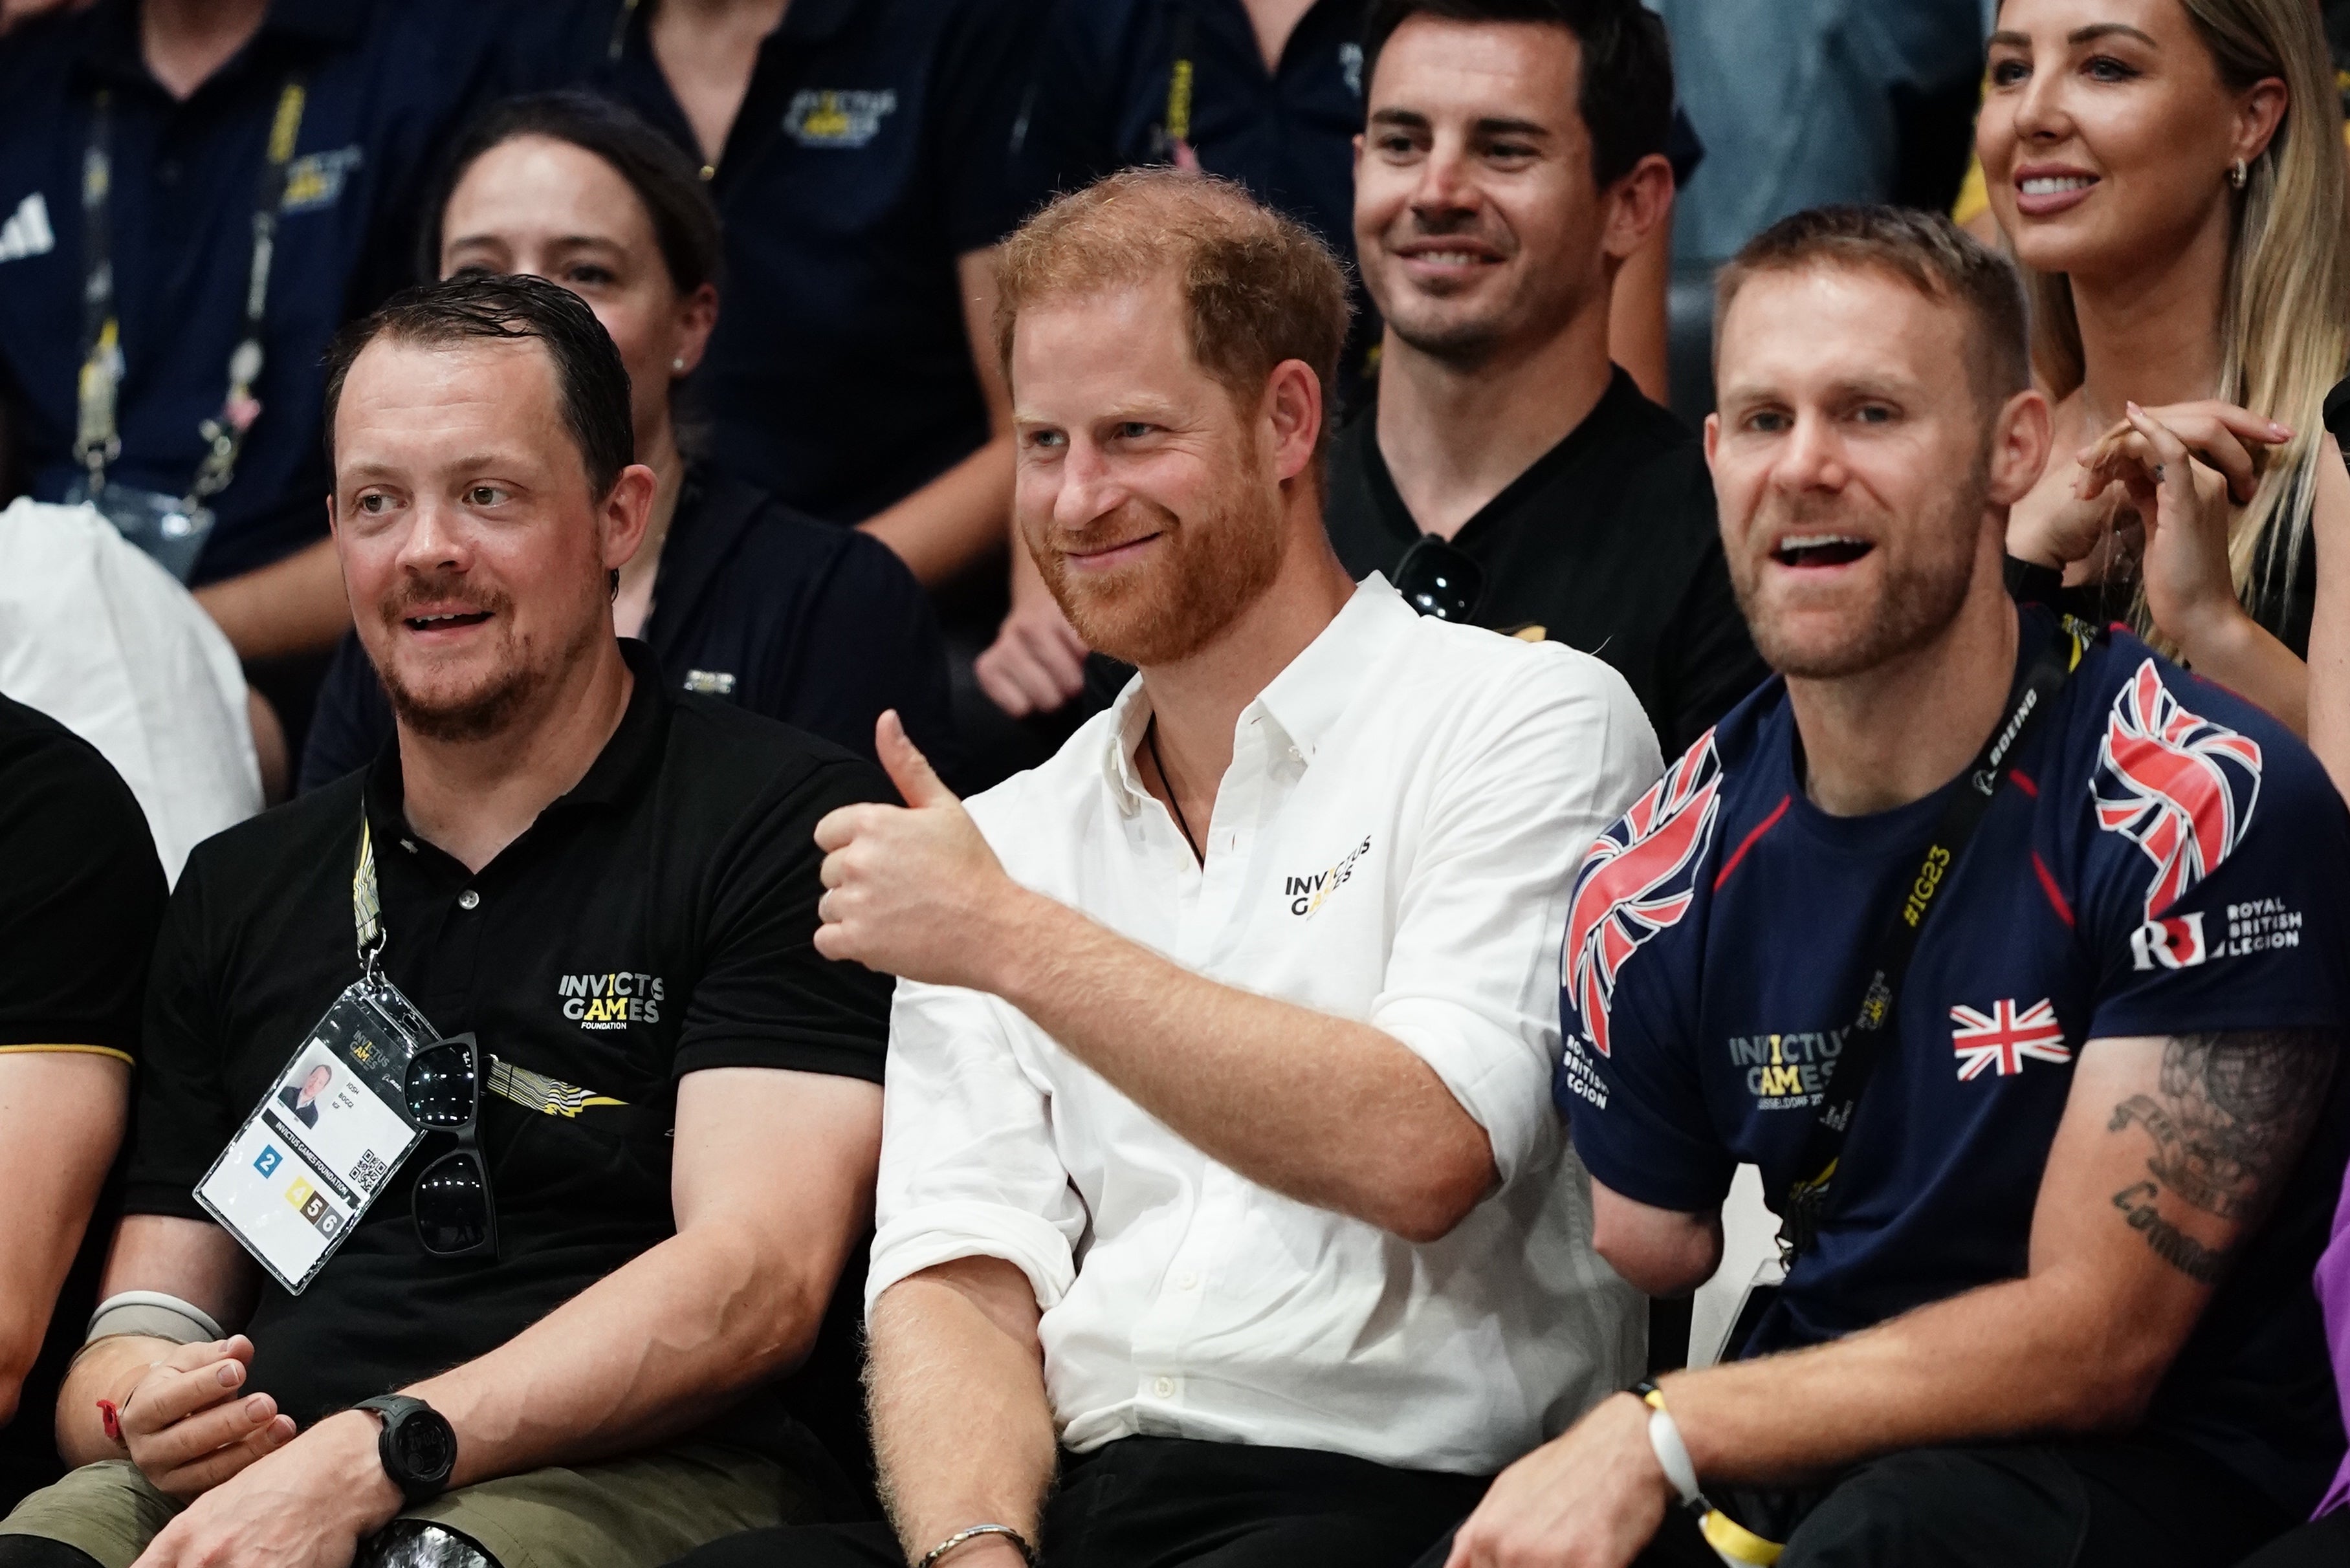 The Duke of Sussex in the crowd at the Invictus Games in Dusseldorf, Germany, last year (Jordan Pettitt/PA)